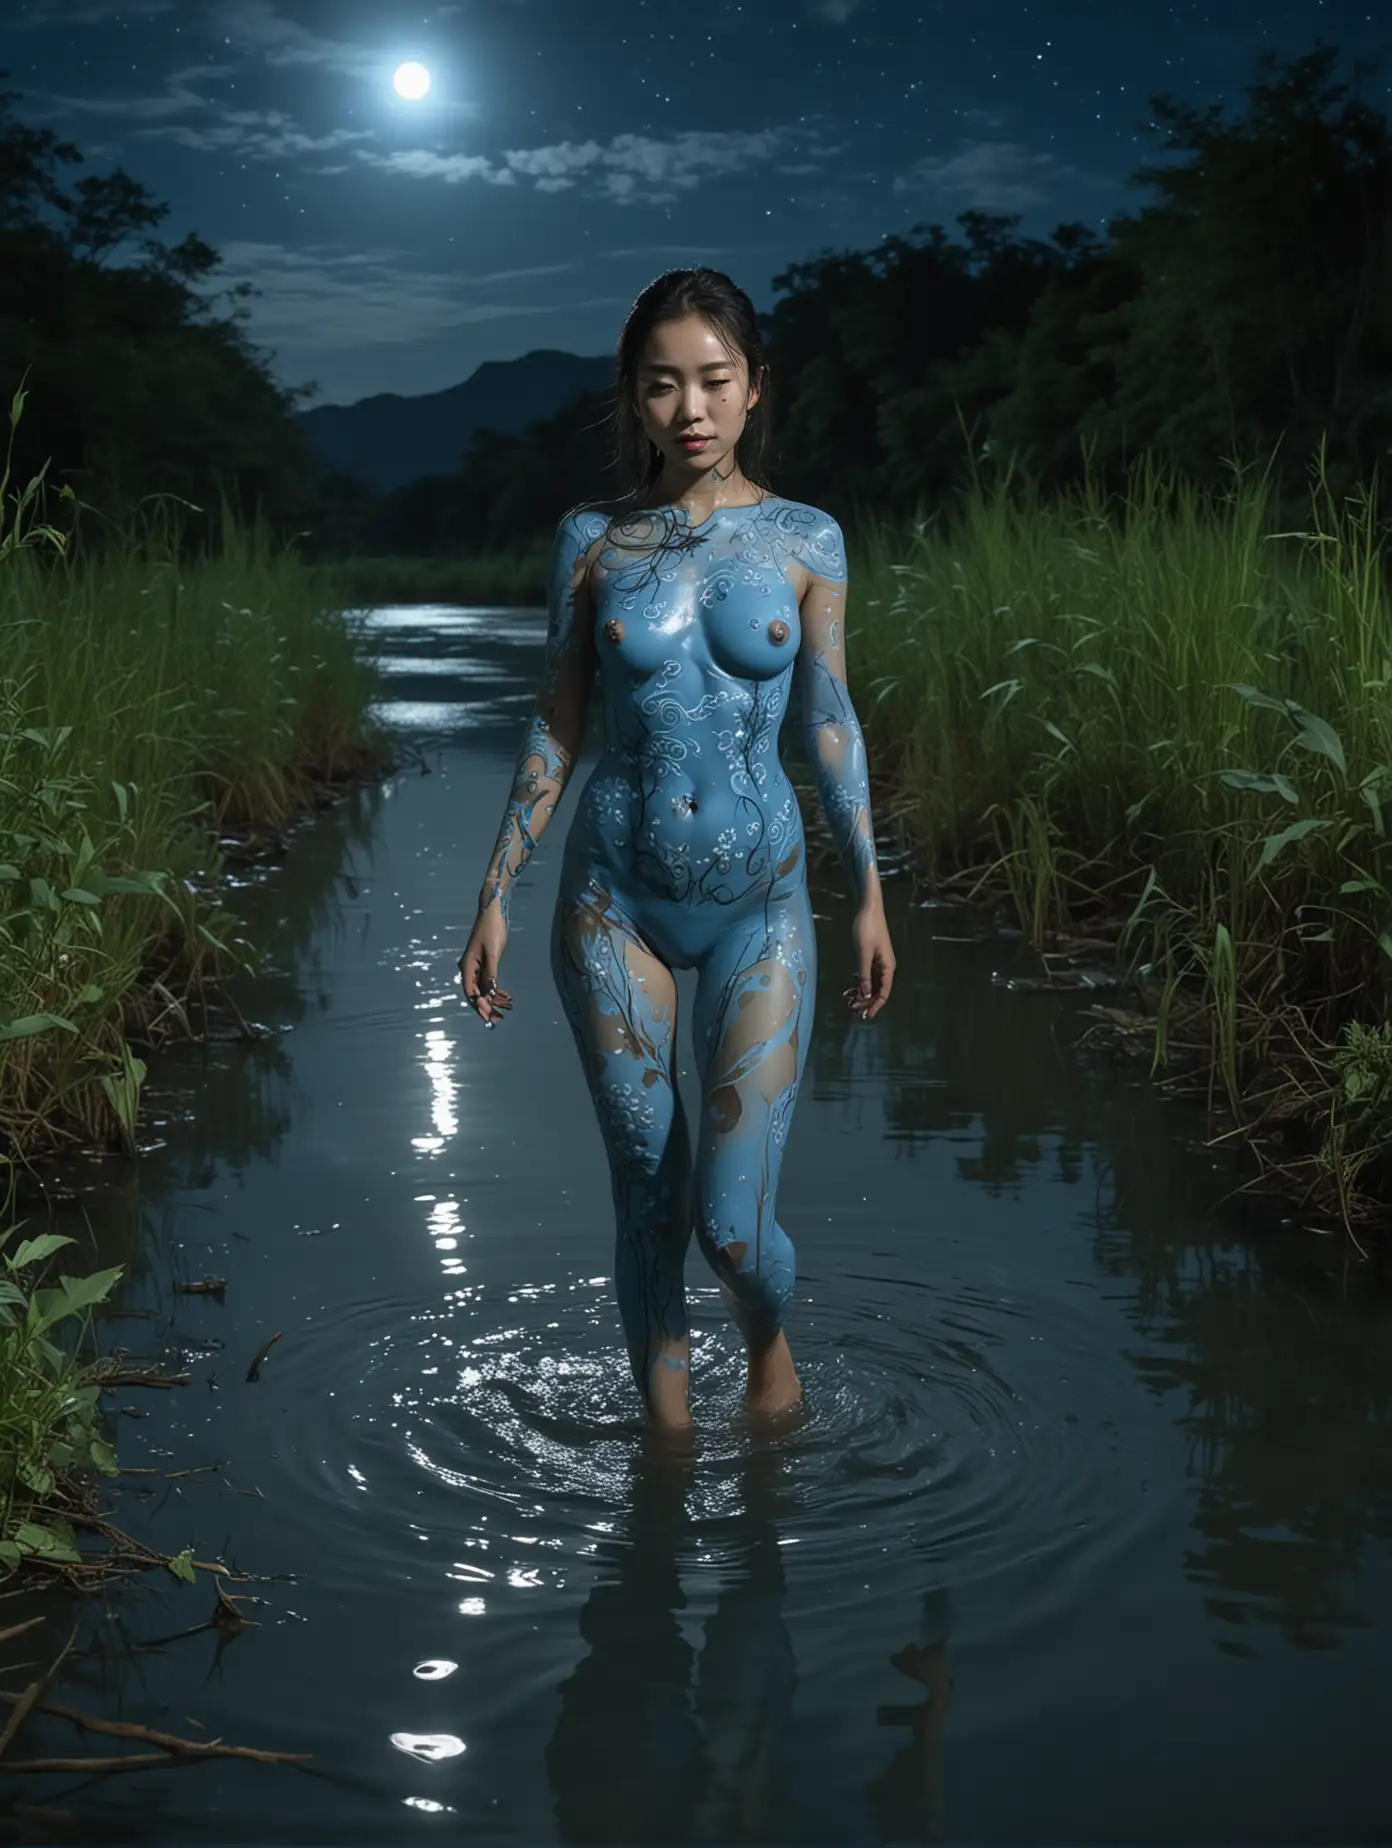 Asian-Woman-with-Sky-Blue-Body-Paint-Walking-in-Moonlit-River